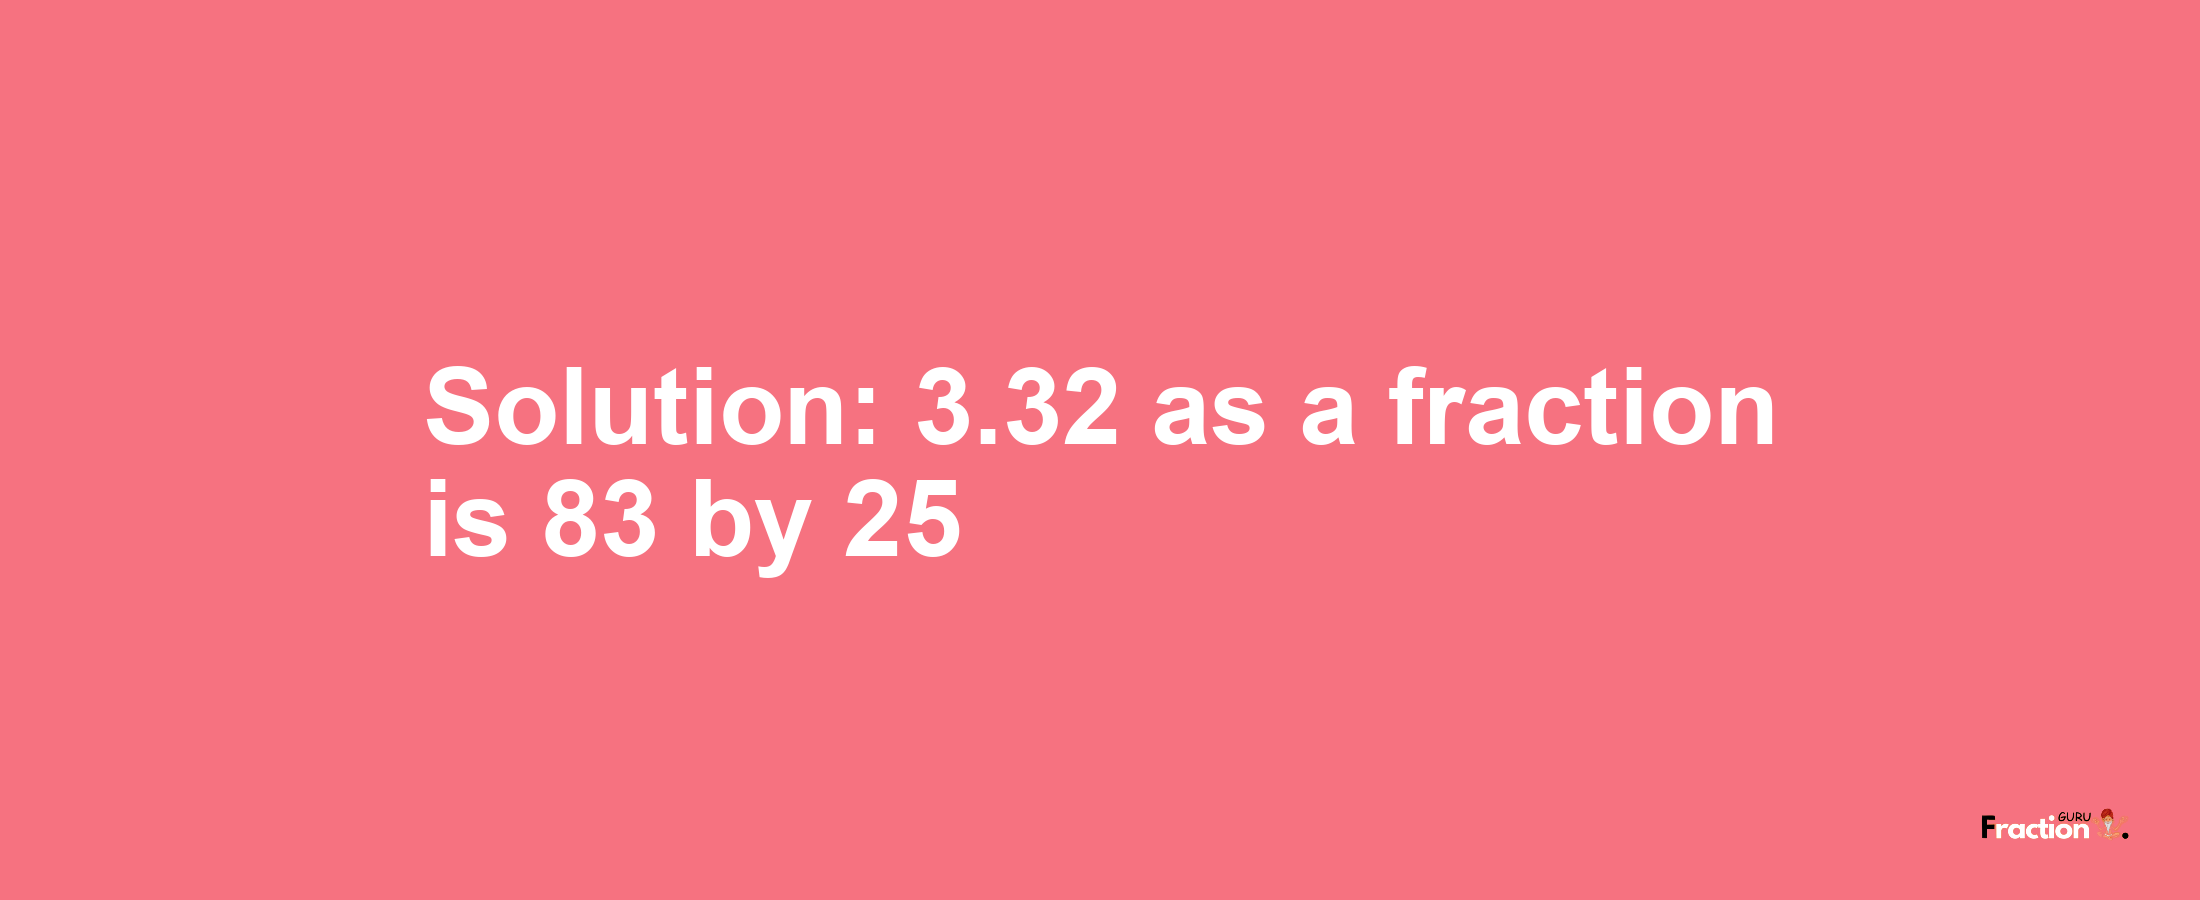 Solution:3.32 as a fraction is 83/25